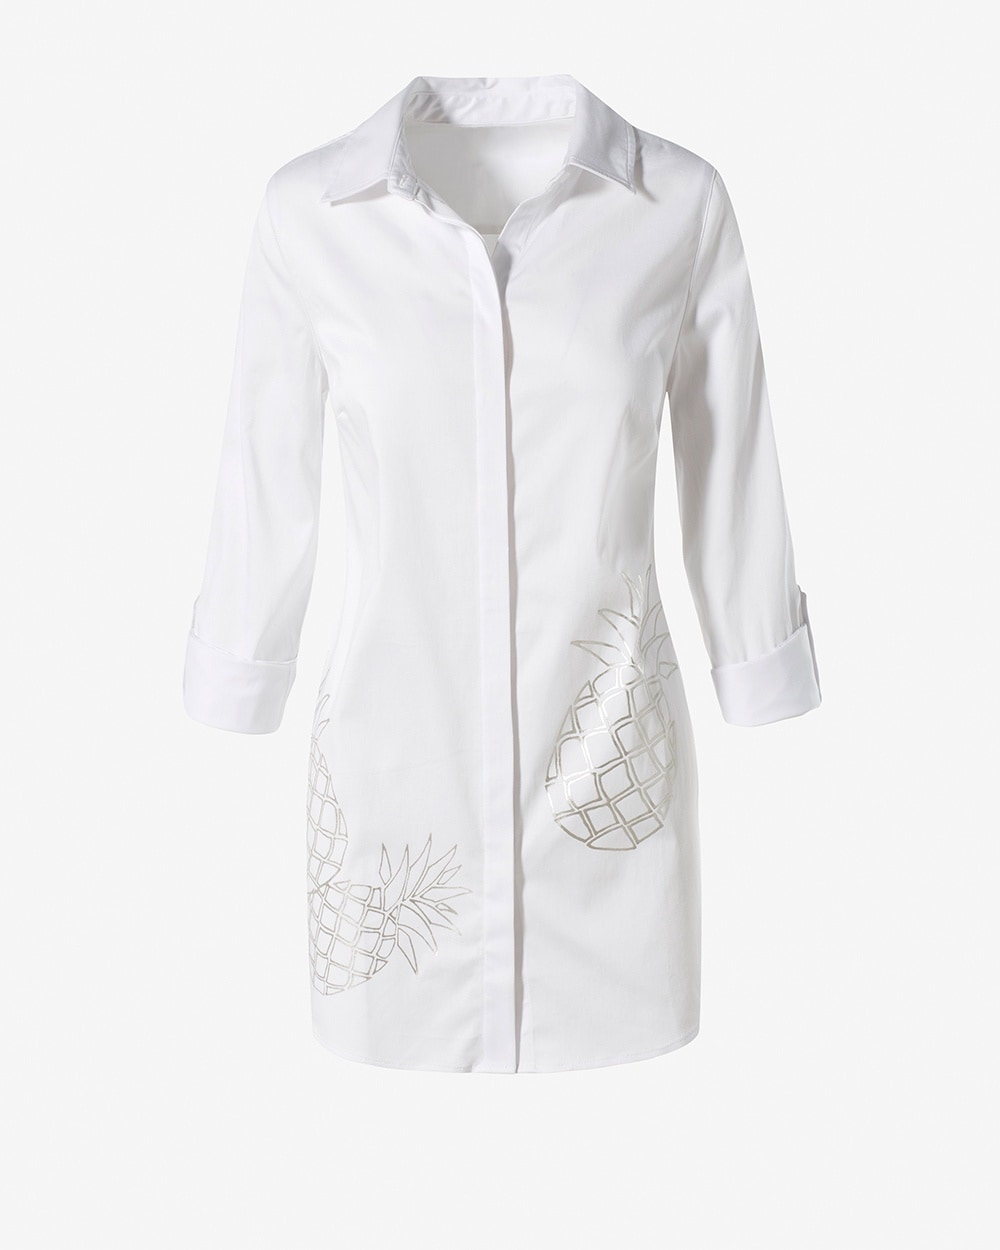 Lined Pineapples Button-Down Shirt